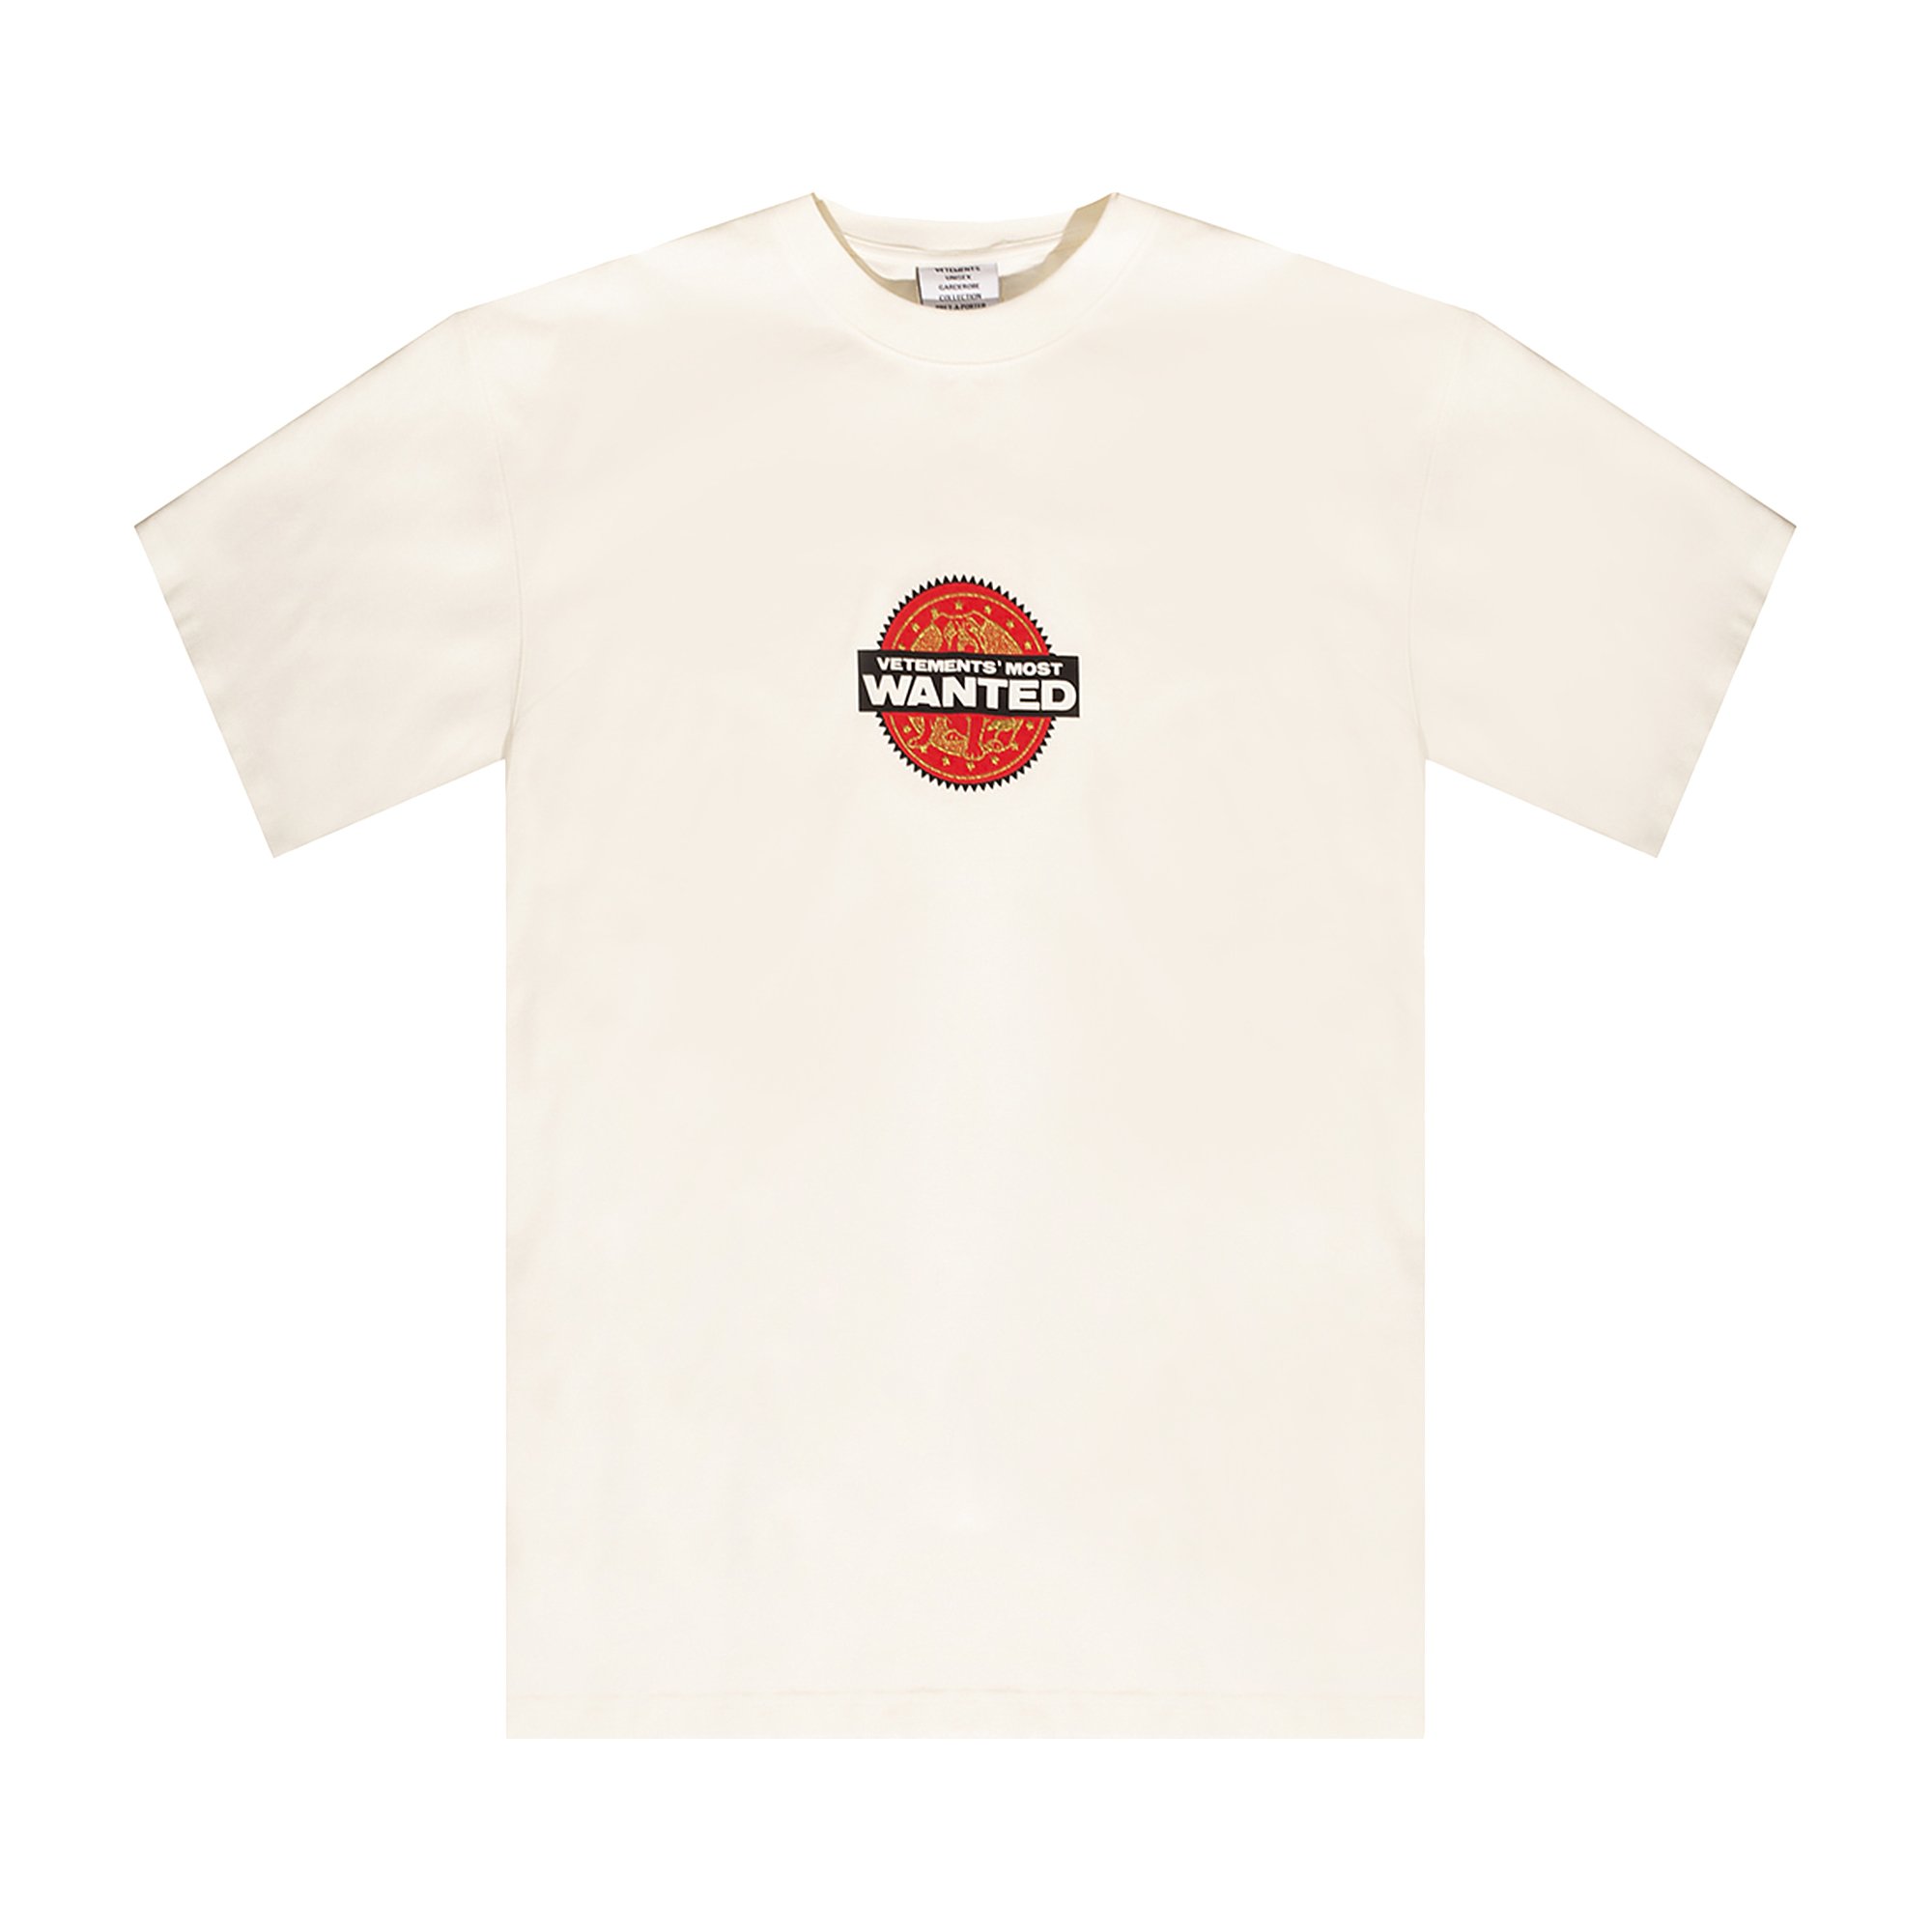 Vetements Most Wanted T-Shirt 'White' | GOAT